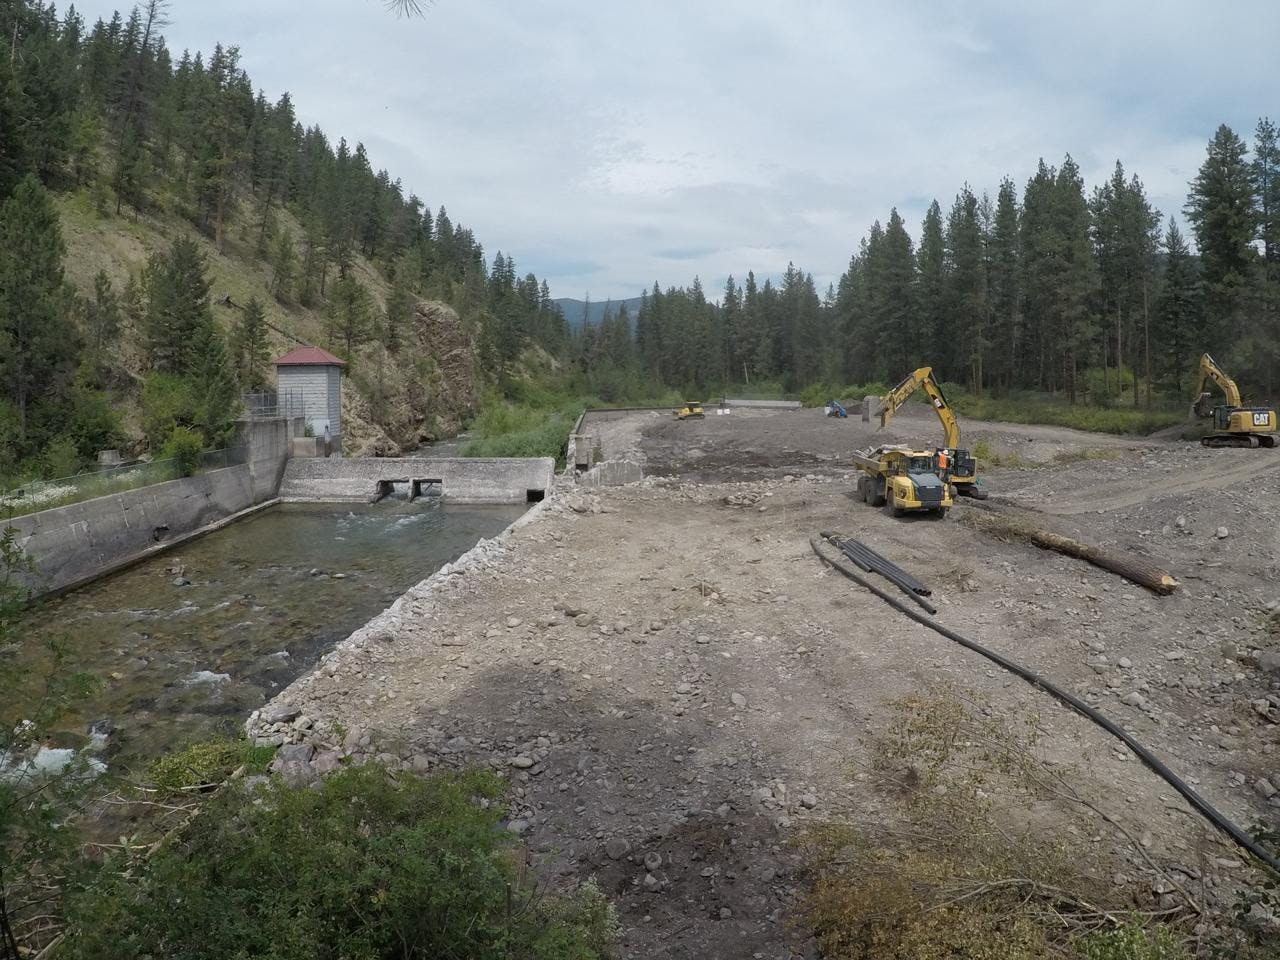 "Fish Ladder" Removed - July 22, 2020